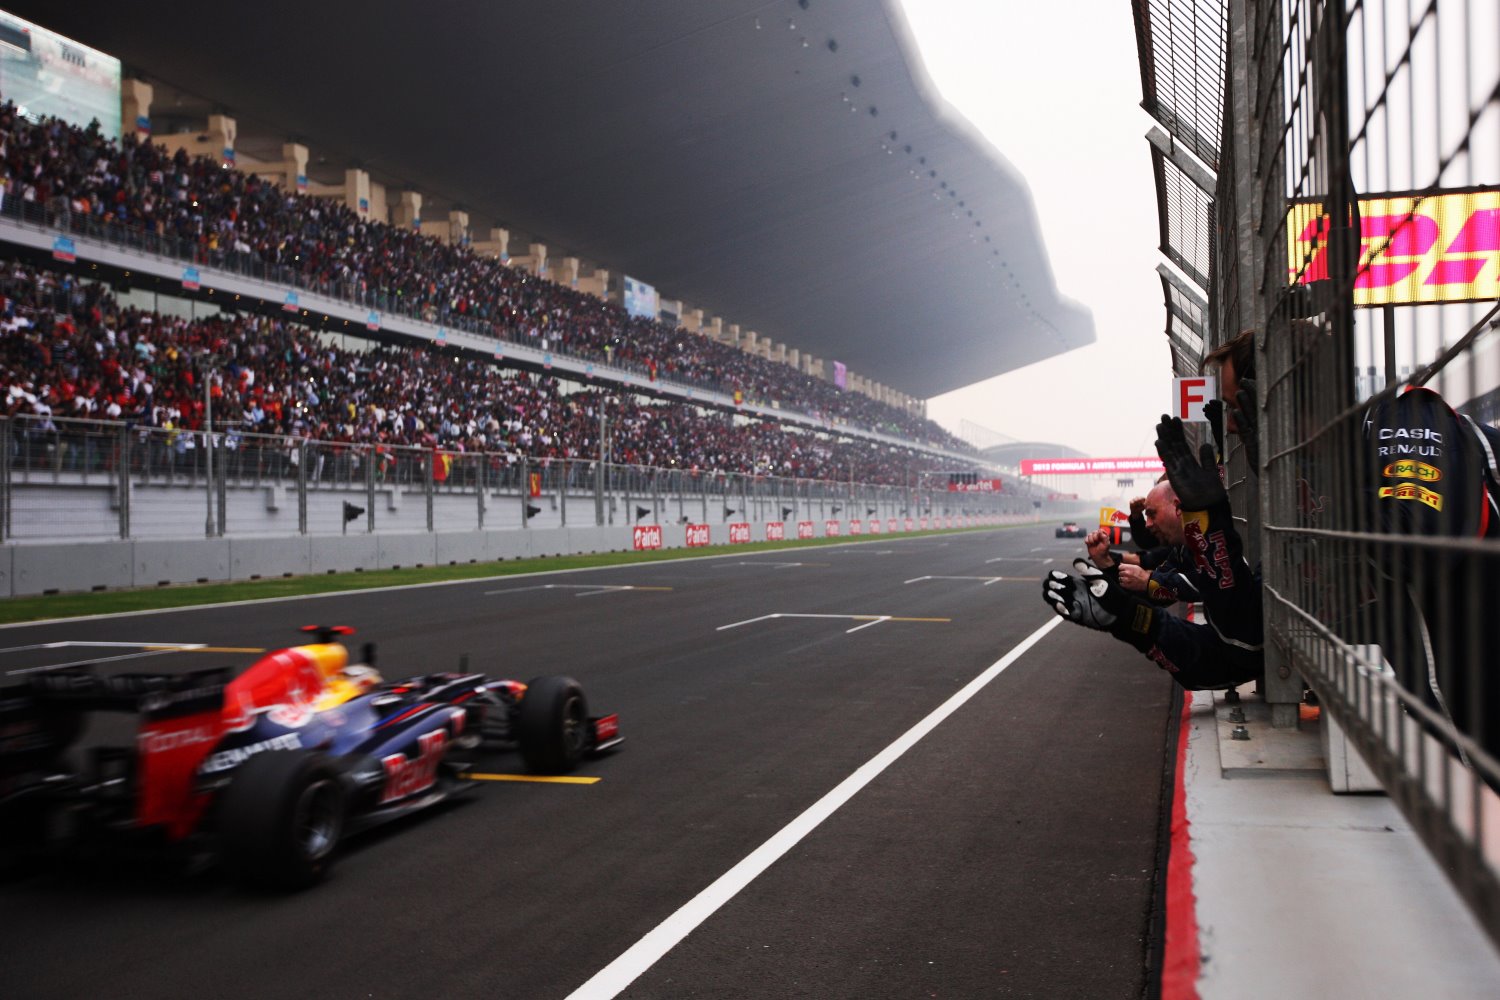 India is not interested enough to pay F1 prices